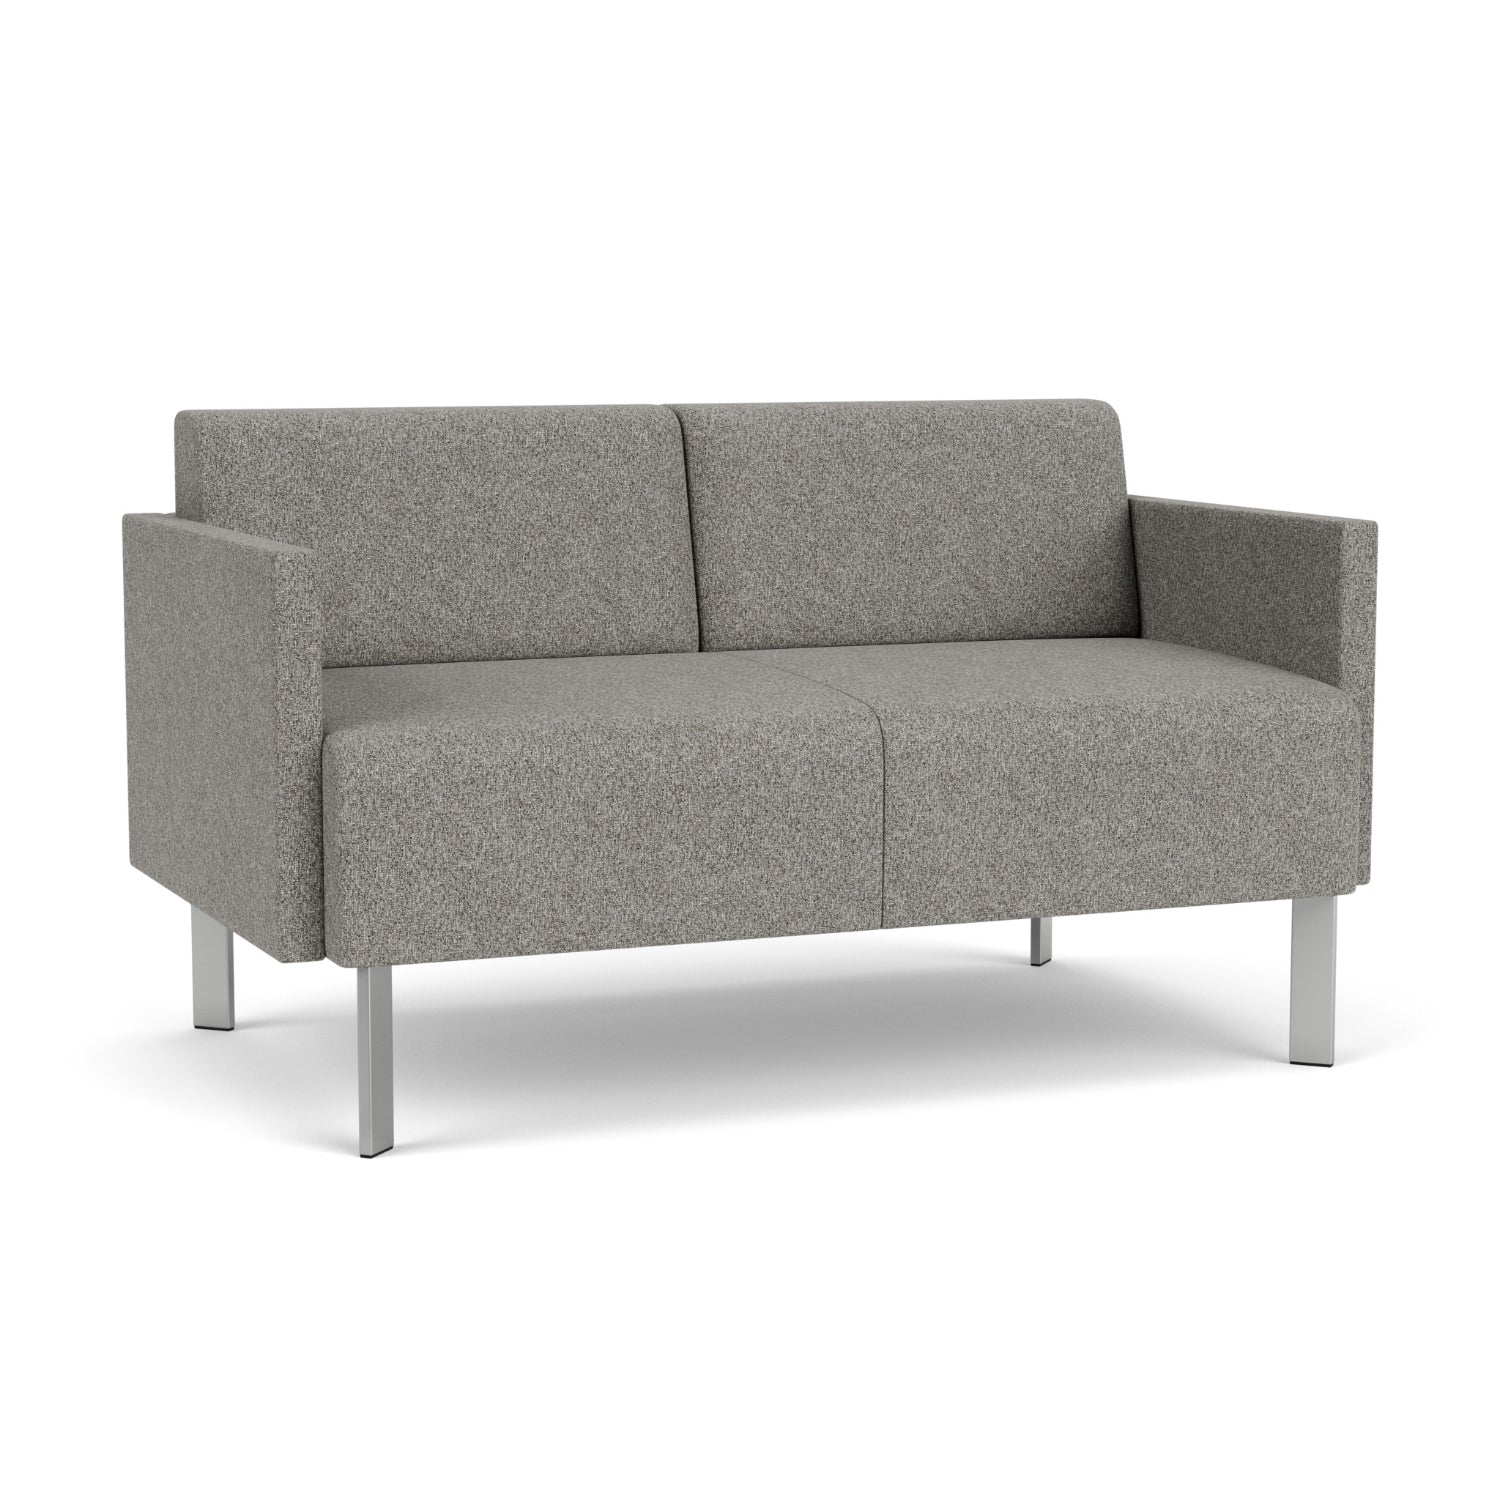 Luxe Collection Reception Seating, Loveseat, Standard Fabric Upholstery, FREE SHIPPING